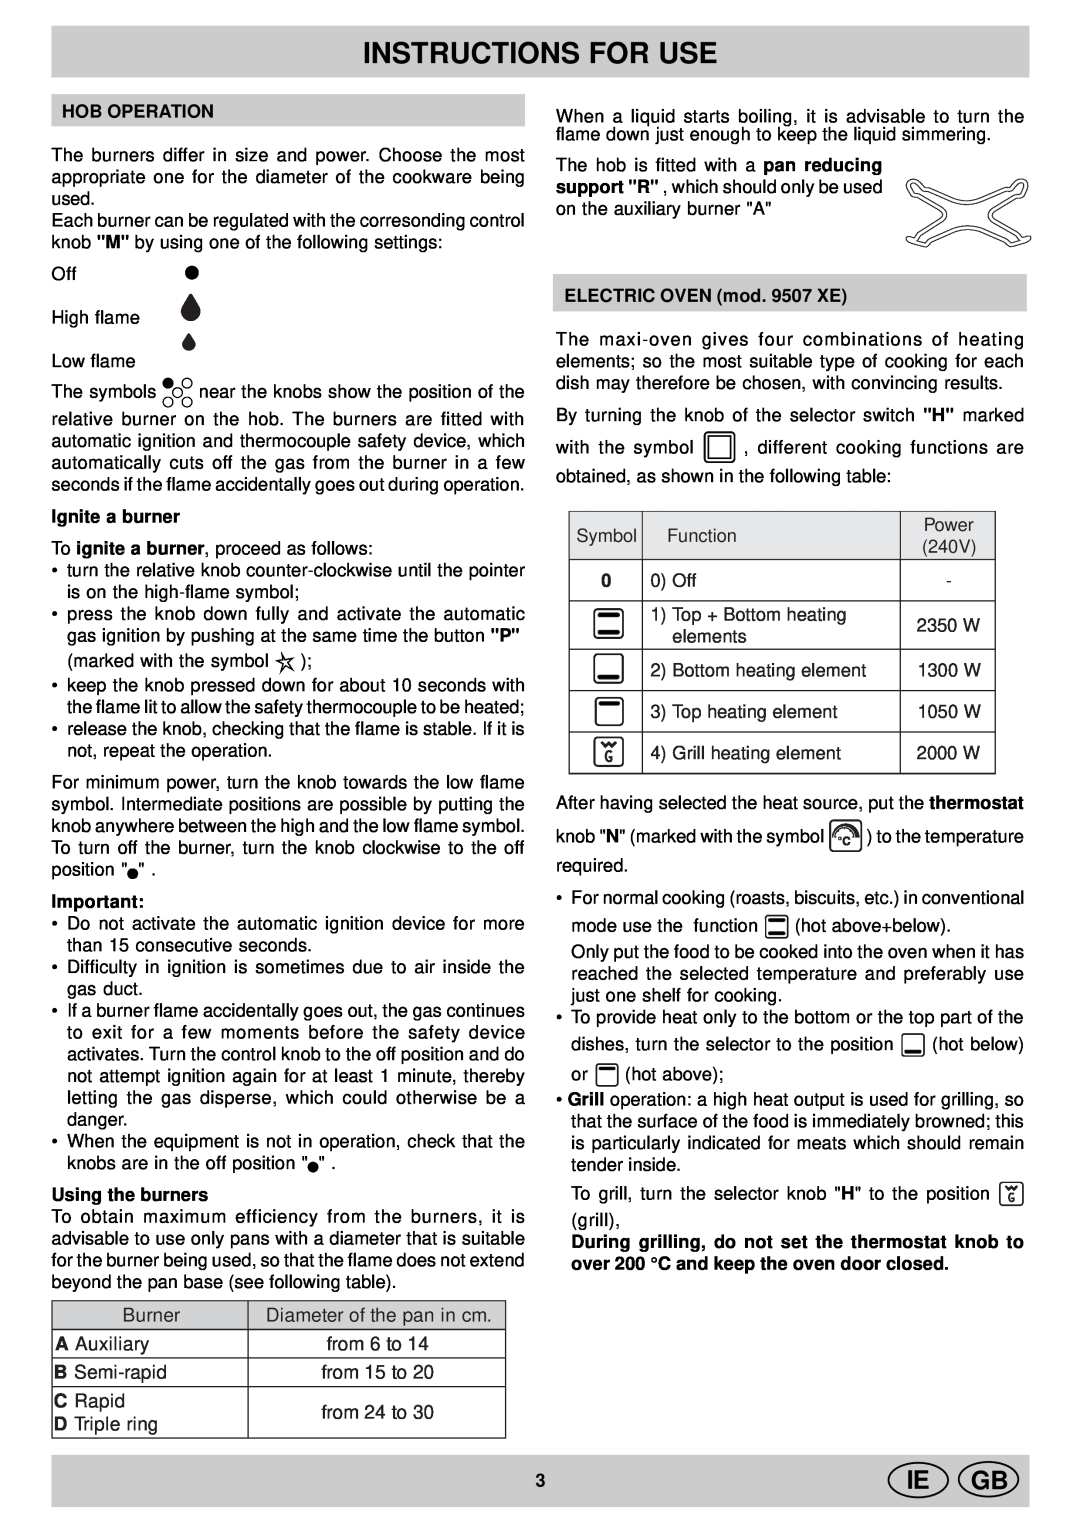 Indesit KP9507EB manual Instructions For Use, Ie Gb, Hob Operation, Ignite a burner, Using the burners 